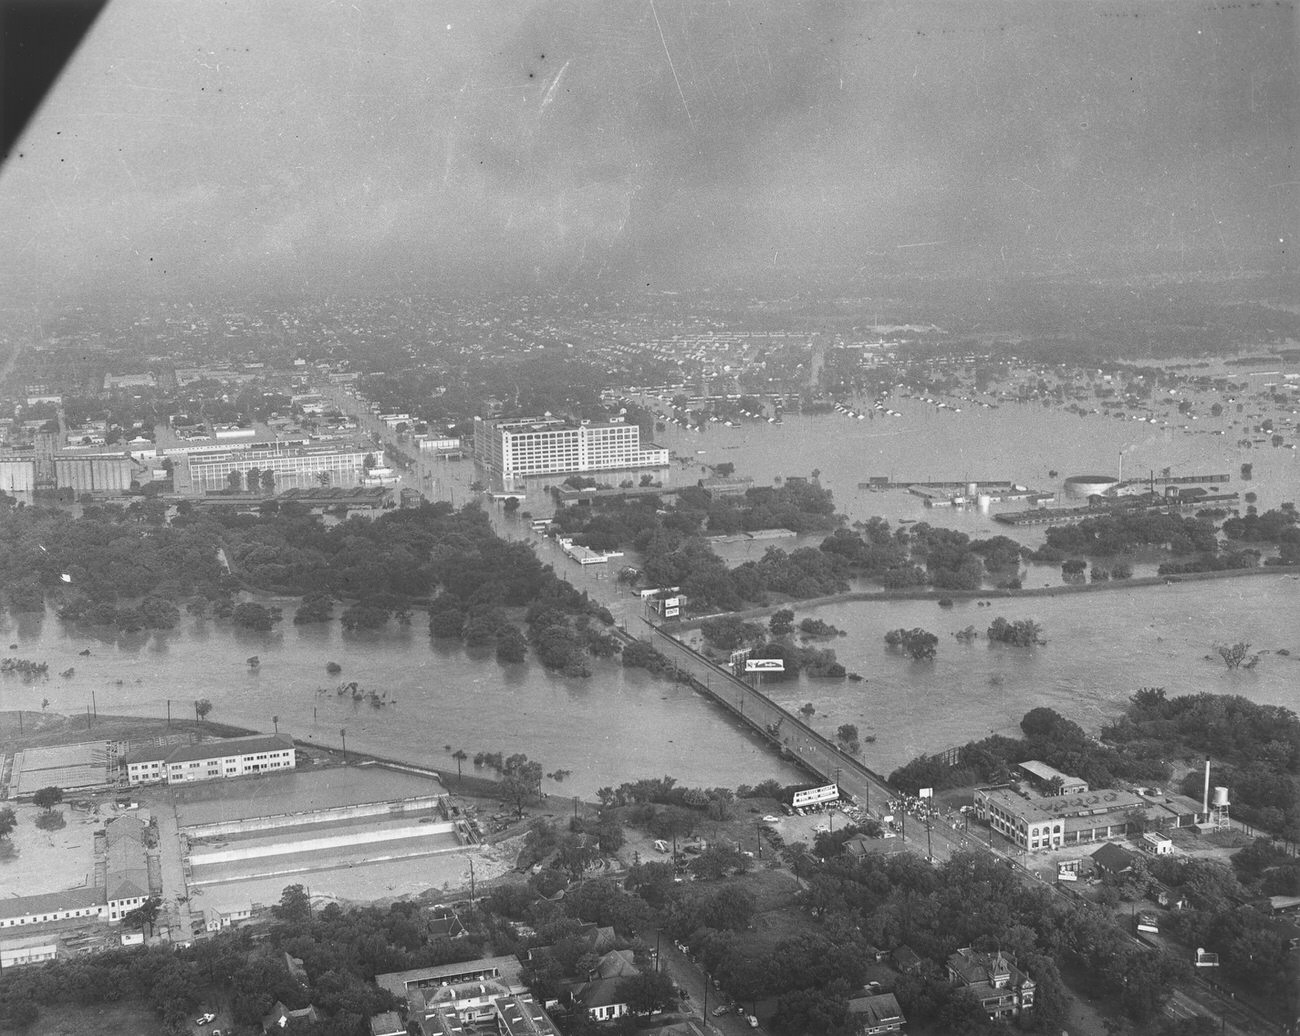 Aerial view of the 1949 flood showing the 7th Street bridge and the Montgomery Ward building, Fort Worth, Texas.